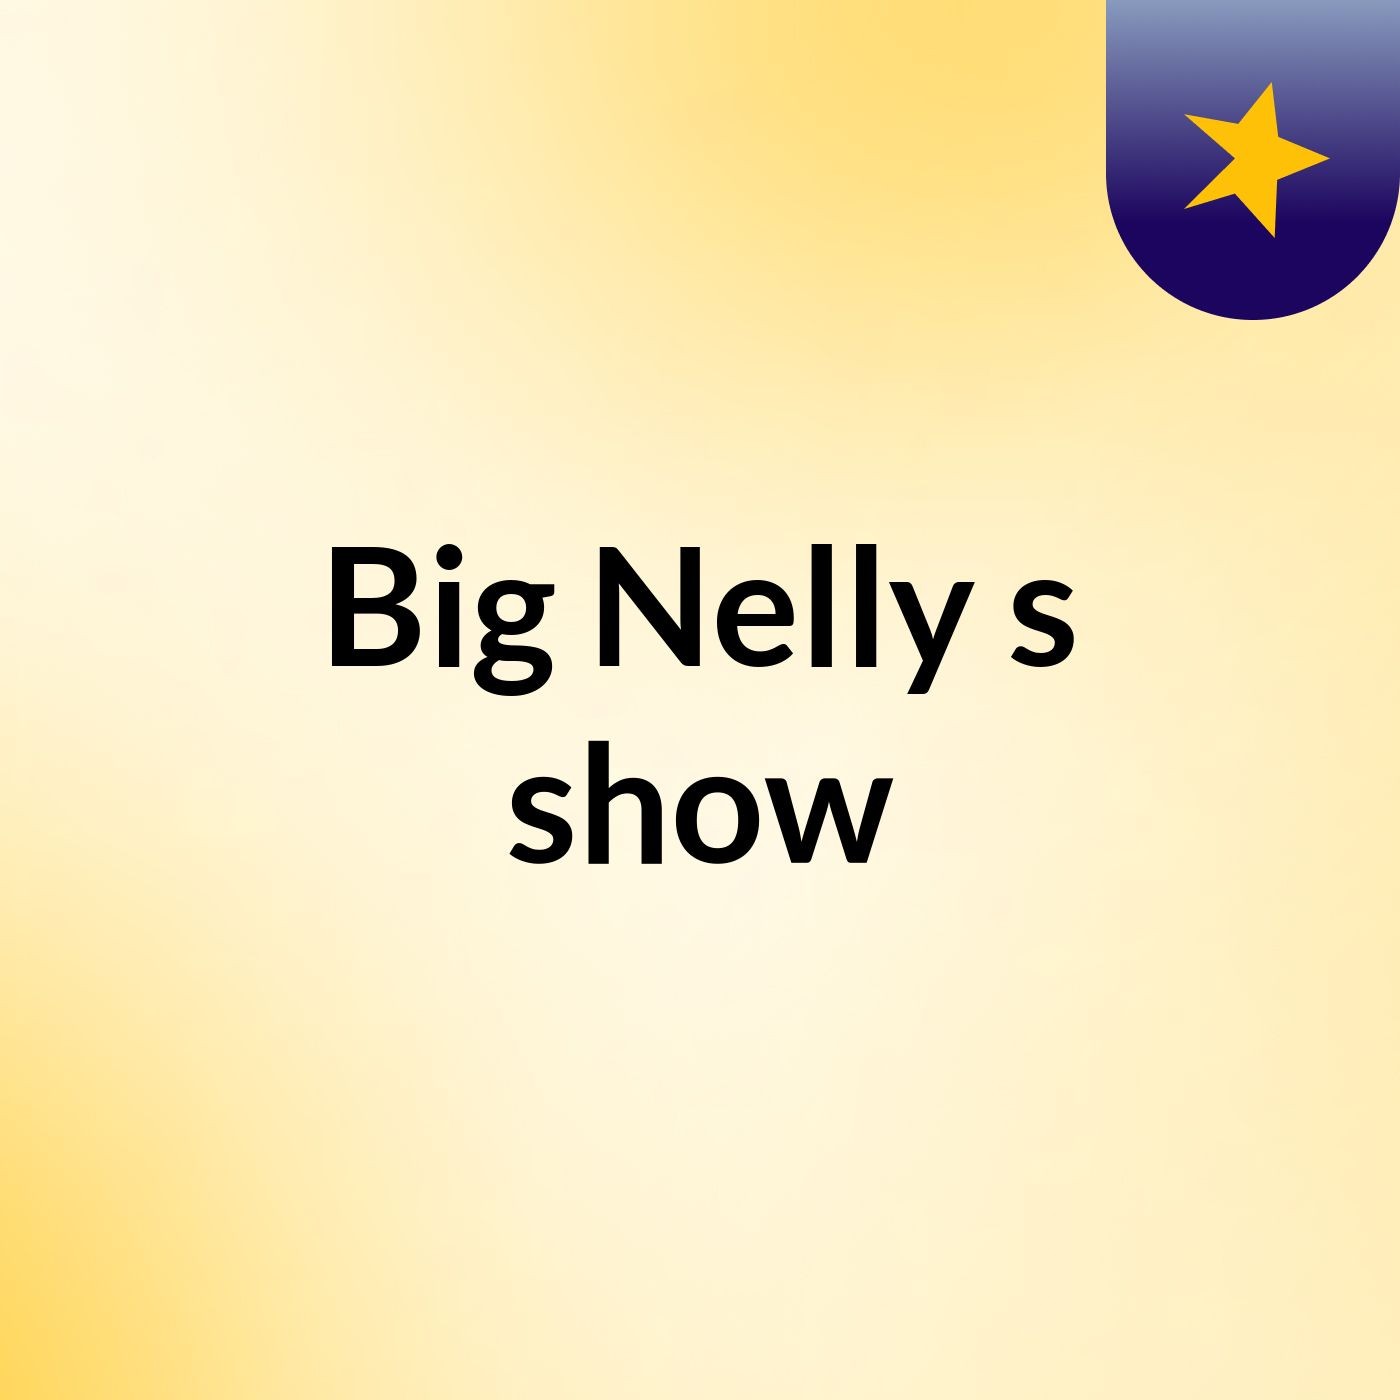 Big Nelly's show